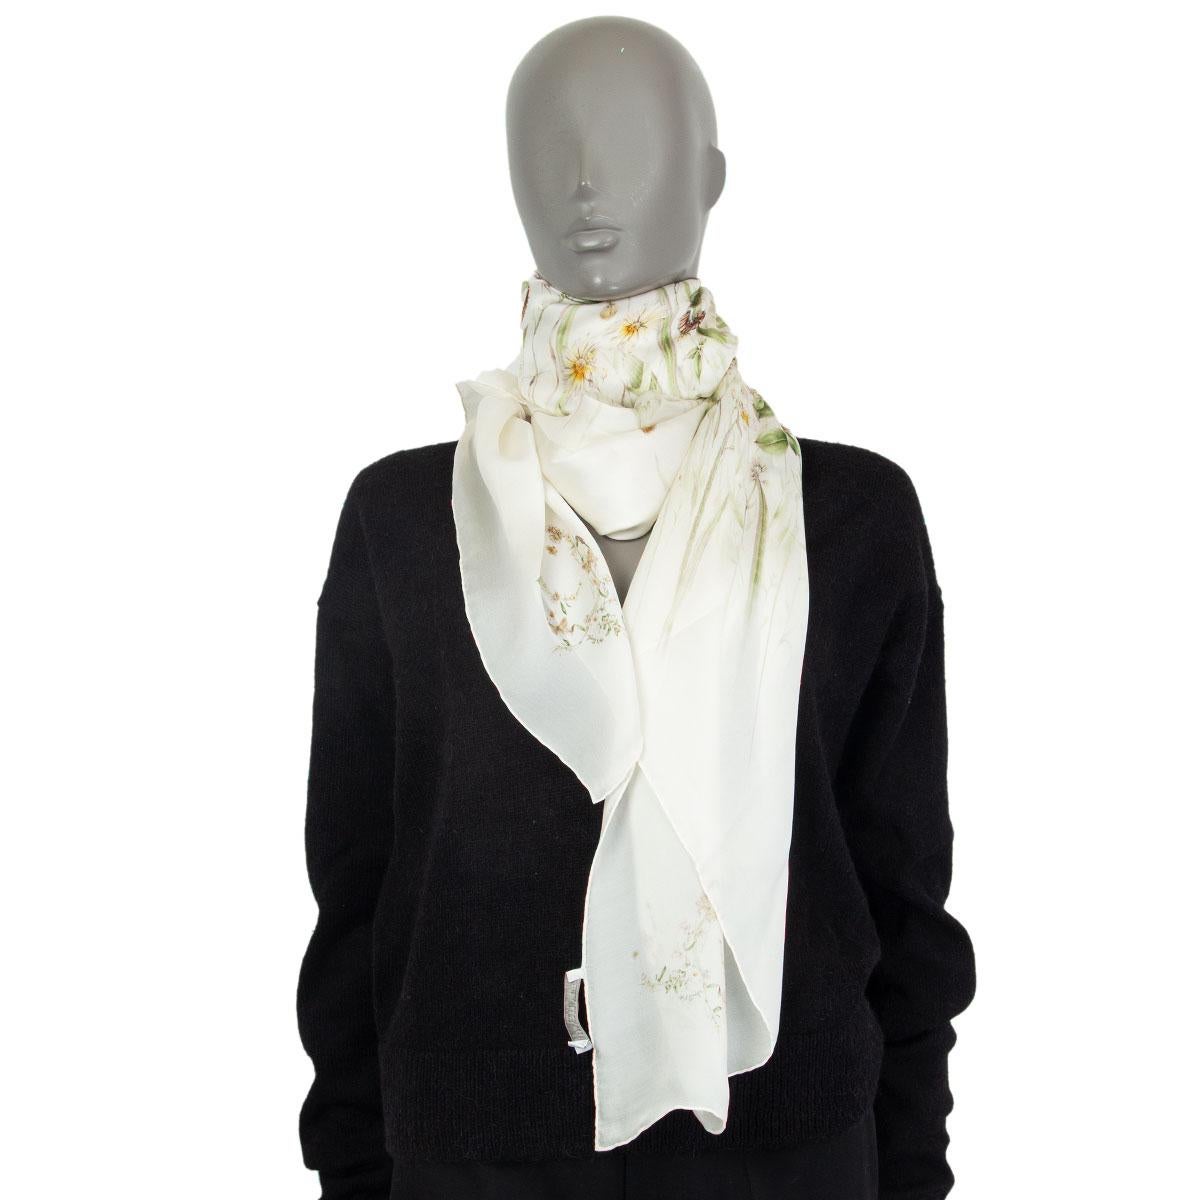 Alexander McQueen meadow and butterfly-print scarf in off-white, light green, brown and yellow sheer silk. Has been worn and is in excellent condition. 

Width 130cm (50.7in)
Length 130cm (50.7in)
